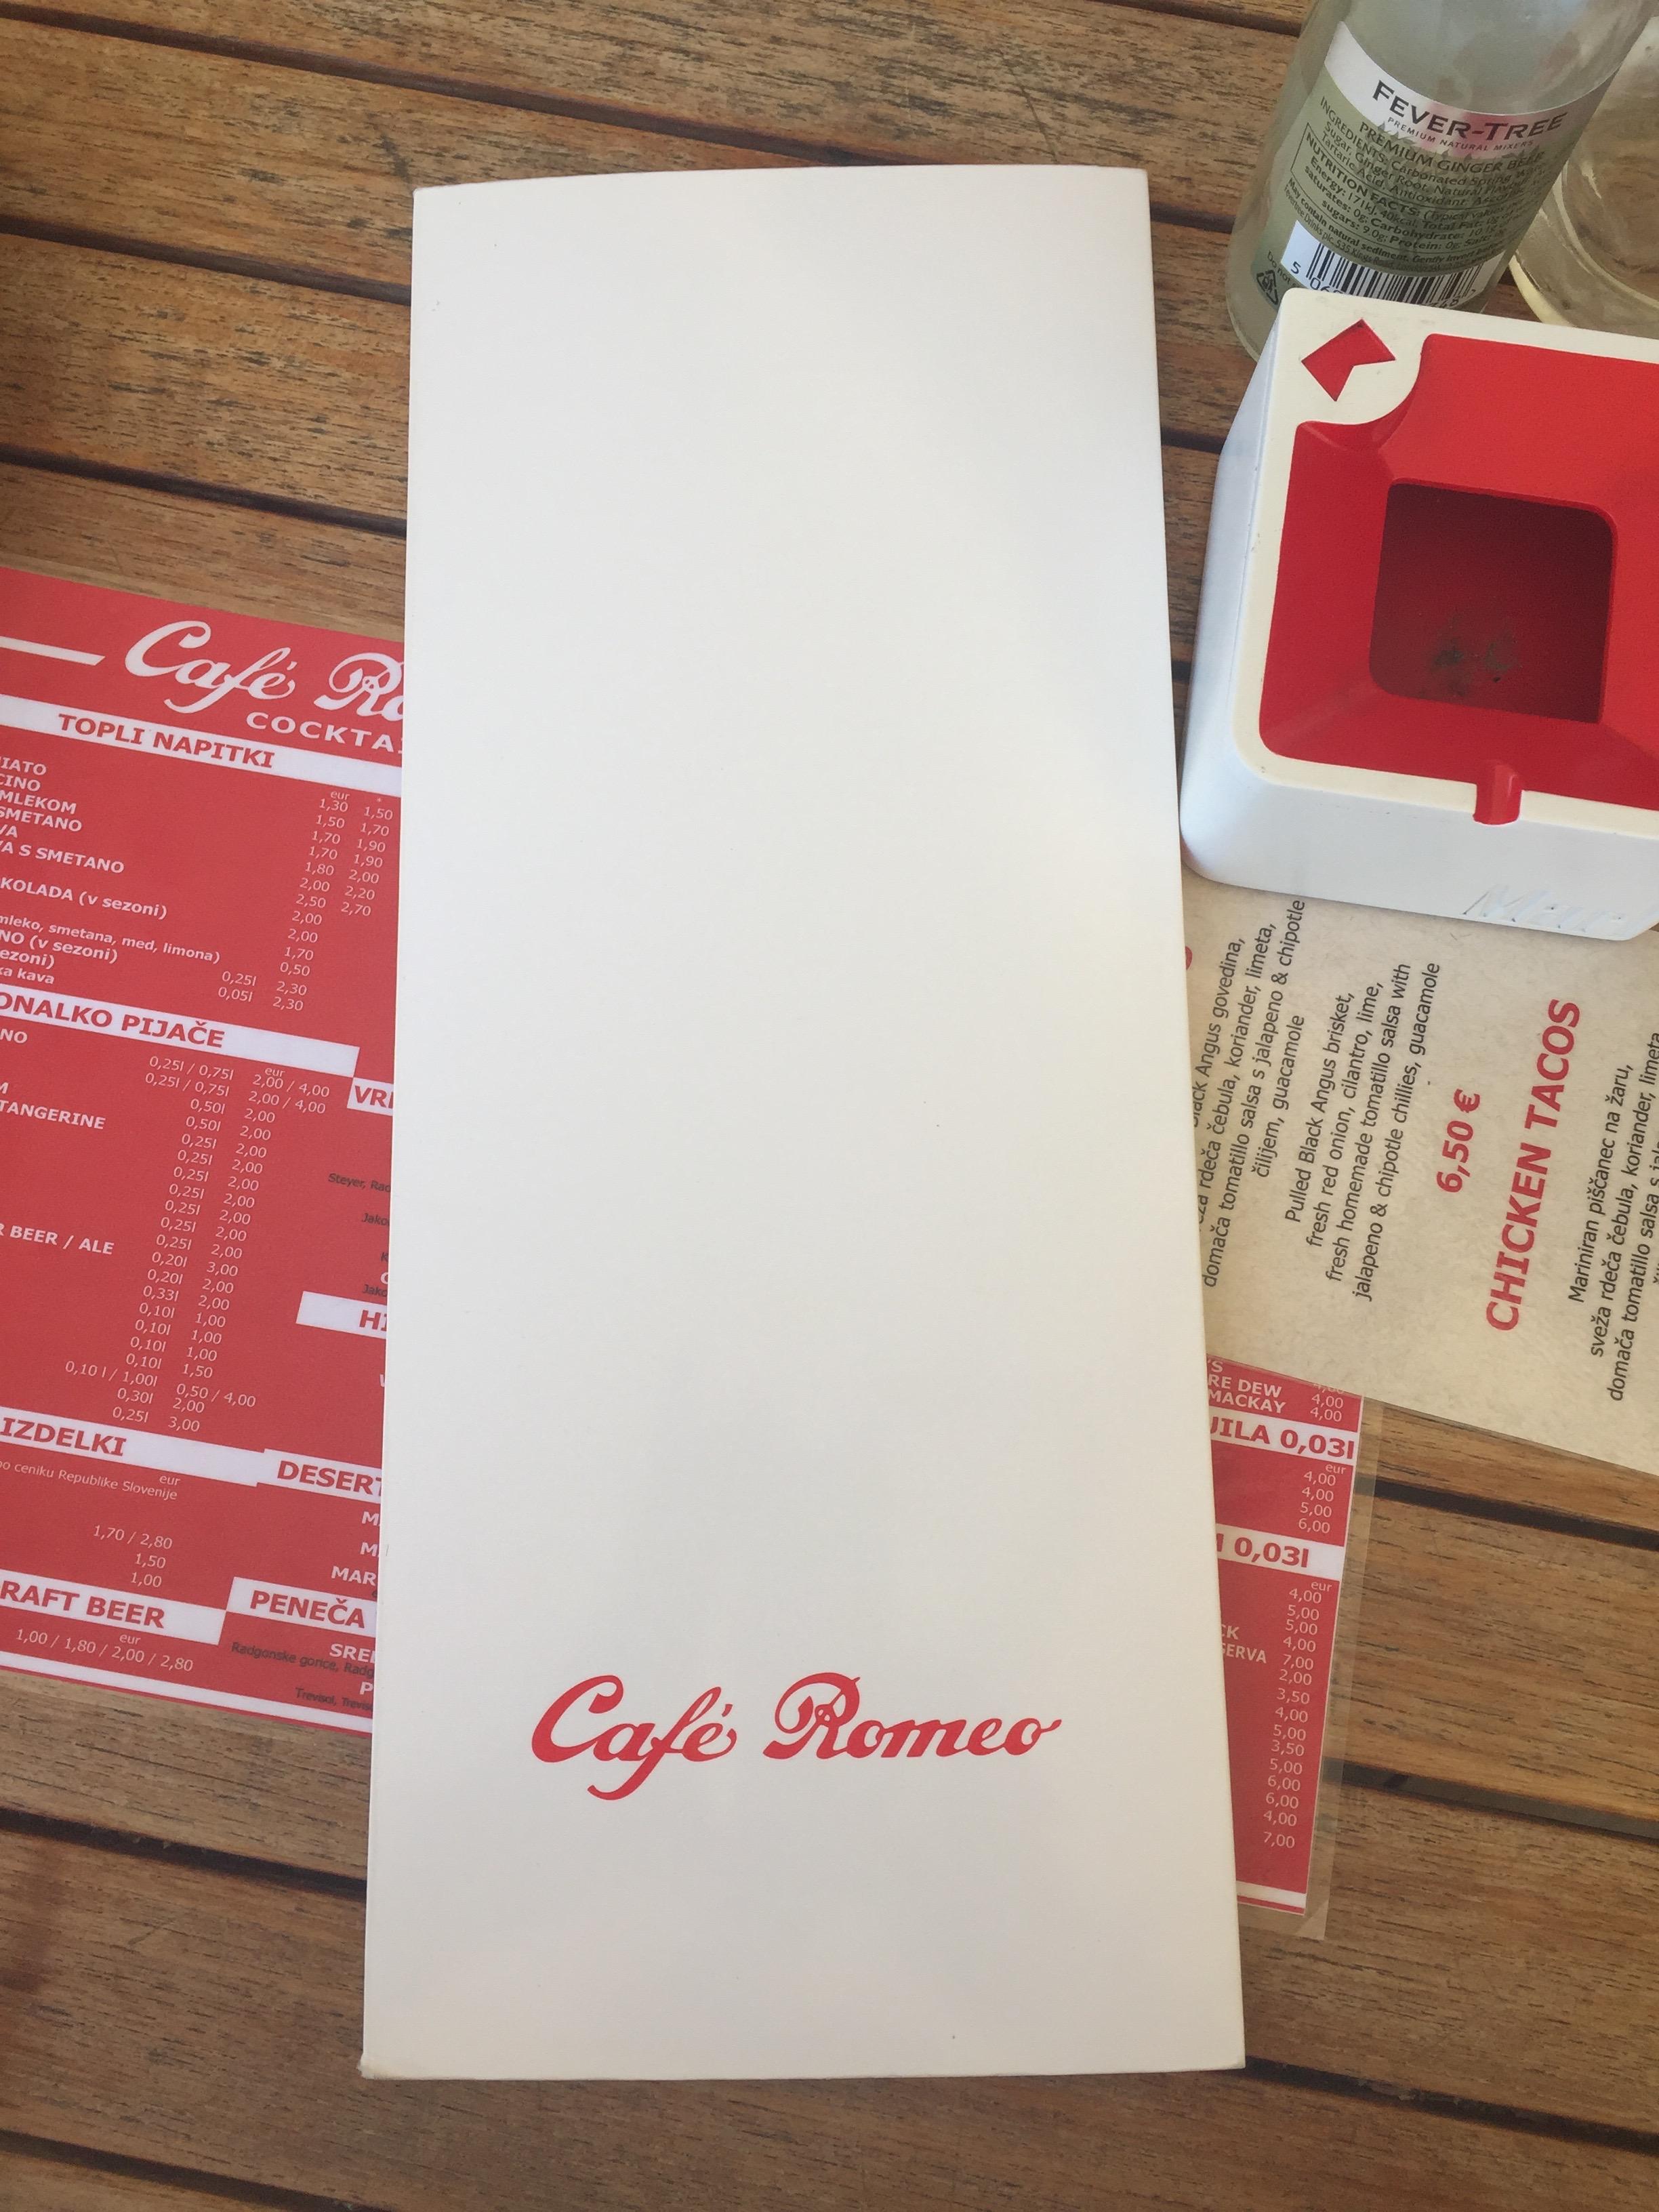 Cover image of this place Café Romeo